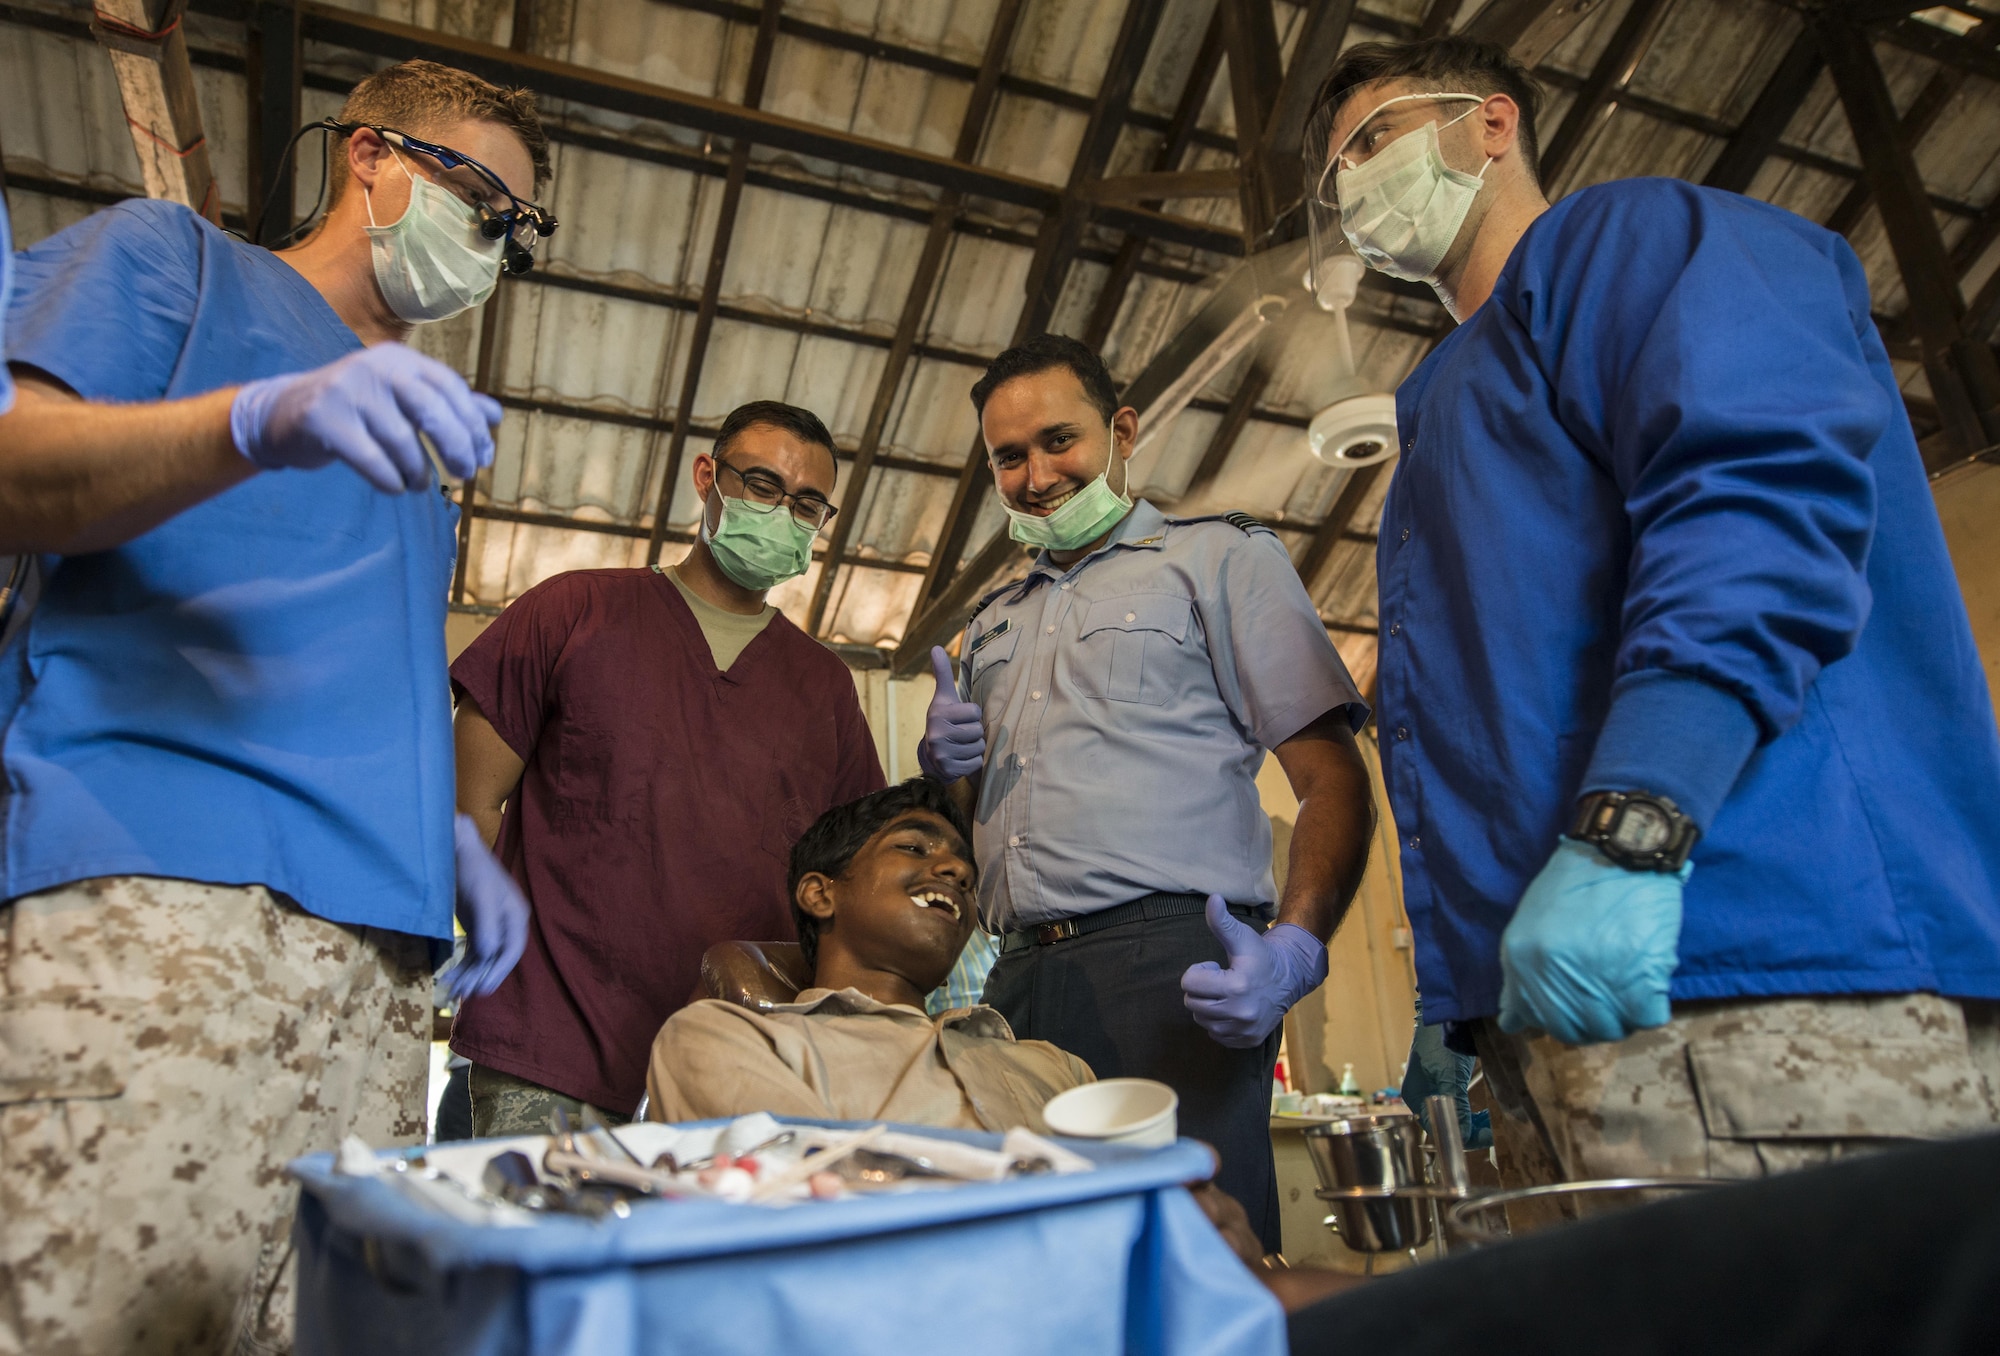 Members from the U.S. Navy, U.S. Air Force and Sri Lankan Air Force smile after a tooth extraction during Pacific Angel (PACANGEL) 16-3 in Jaffna, Sri Lanka, Aug. 16, 2016. Operation PACANGEL 16 is a joint and combined humanitarian assistance operation. Led by Pacific Air Forces, the exercise enhances participating nations’ humanitarian assistance and disaster relief (HA/DR) capabilities while providing needed services to people in need throughout Southeast Asia. (U.S. Air Force photo by Senior Airman Brittany A. Chase)